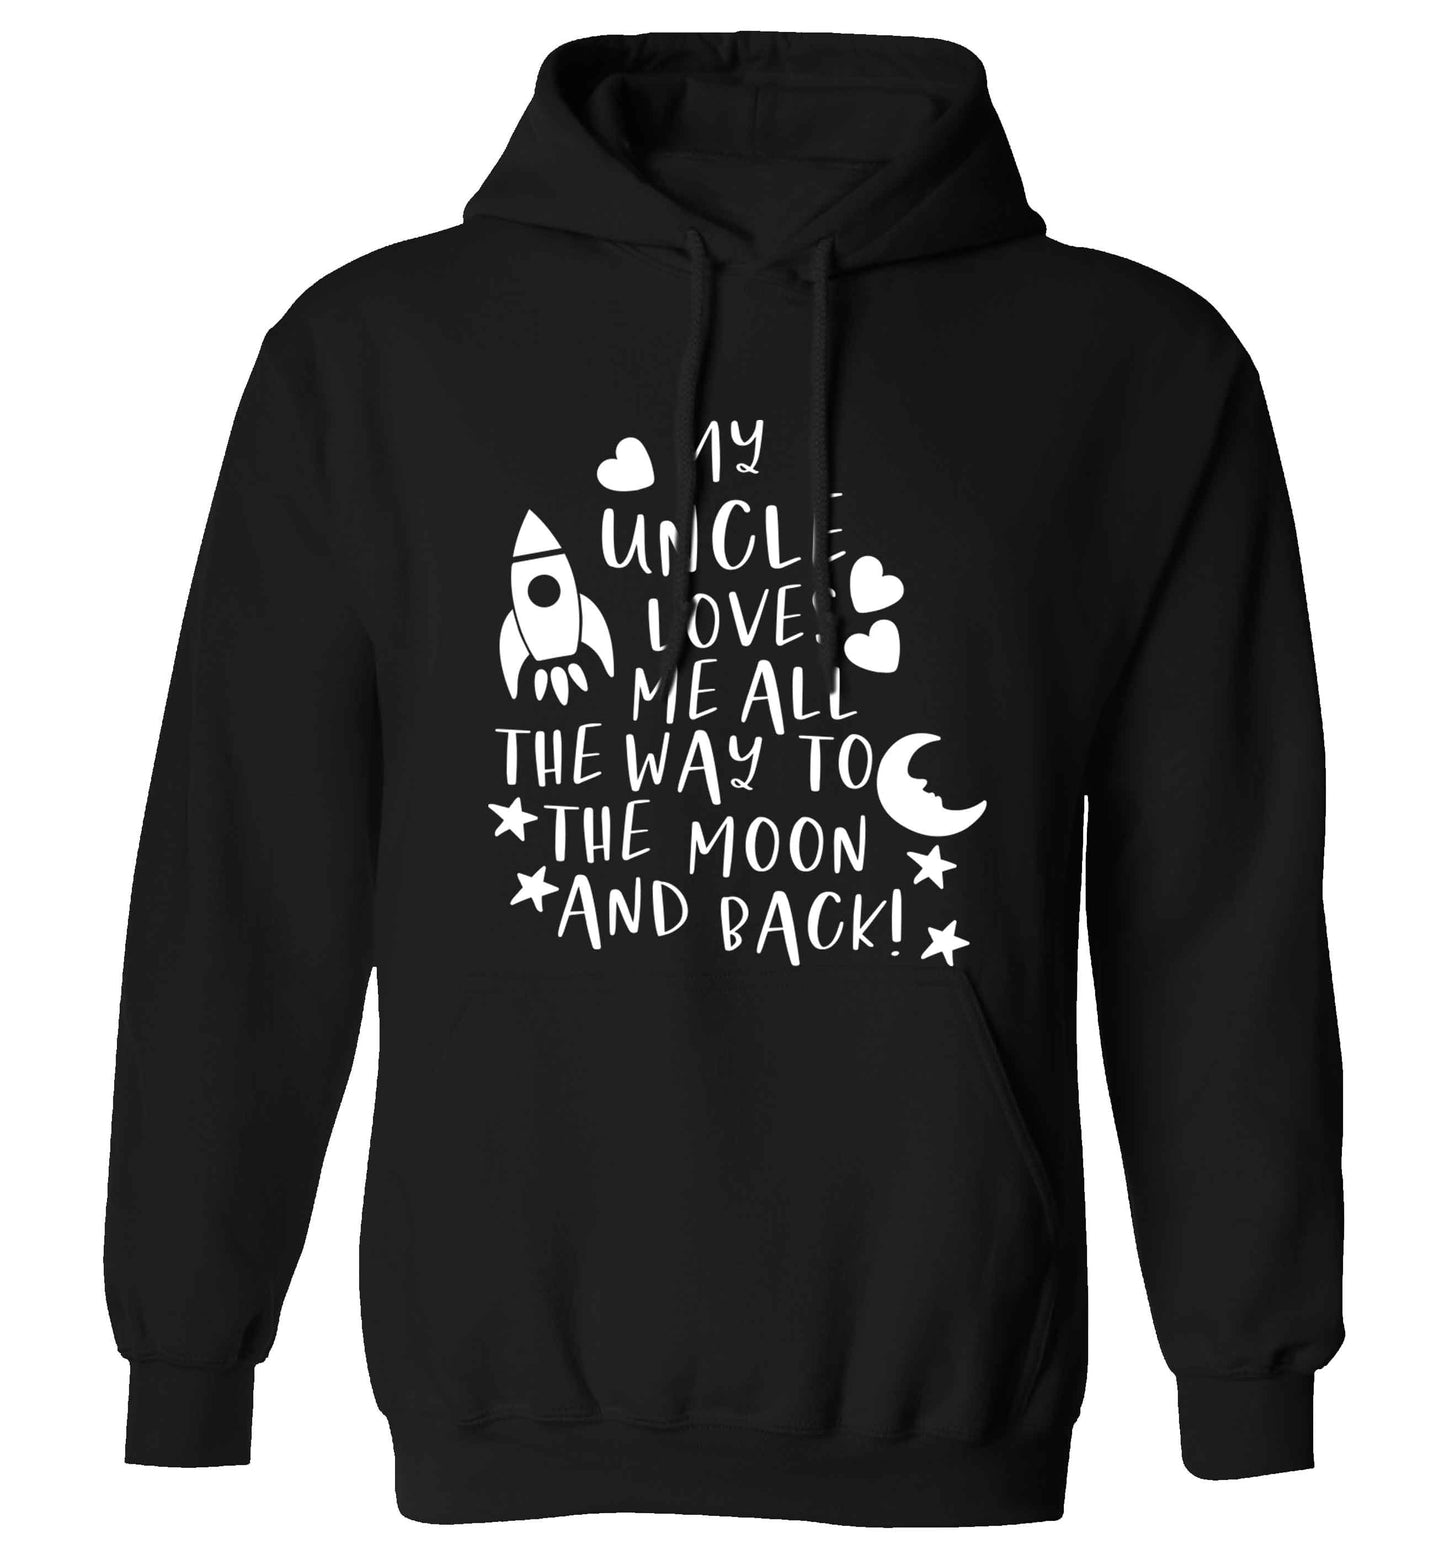 My uncle loves me all the way to the moon and back adults unisex black hoodie 2XL